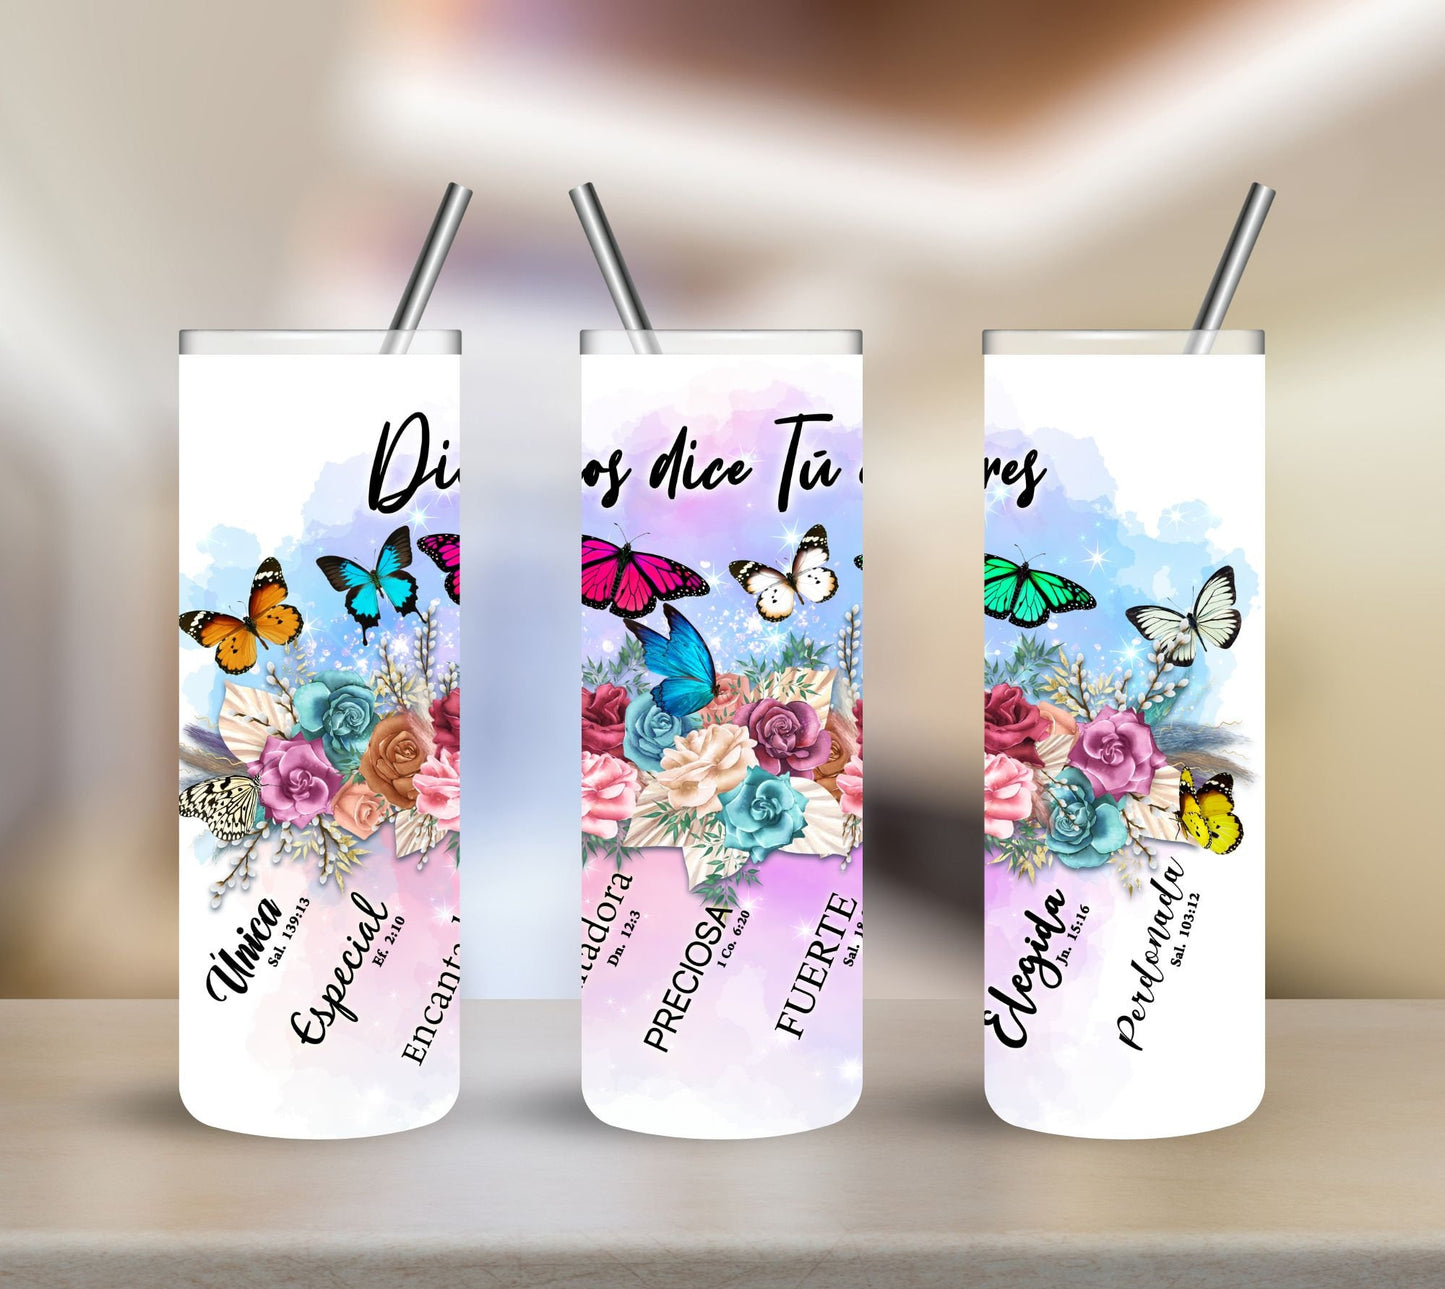 Dios dice tu eres... Tumbler, Christian inspired gift for her, 20 ounce travel tumbler, gift for her, Mothers day, strong woman themed cup